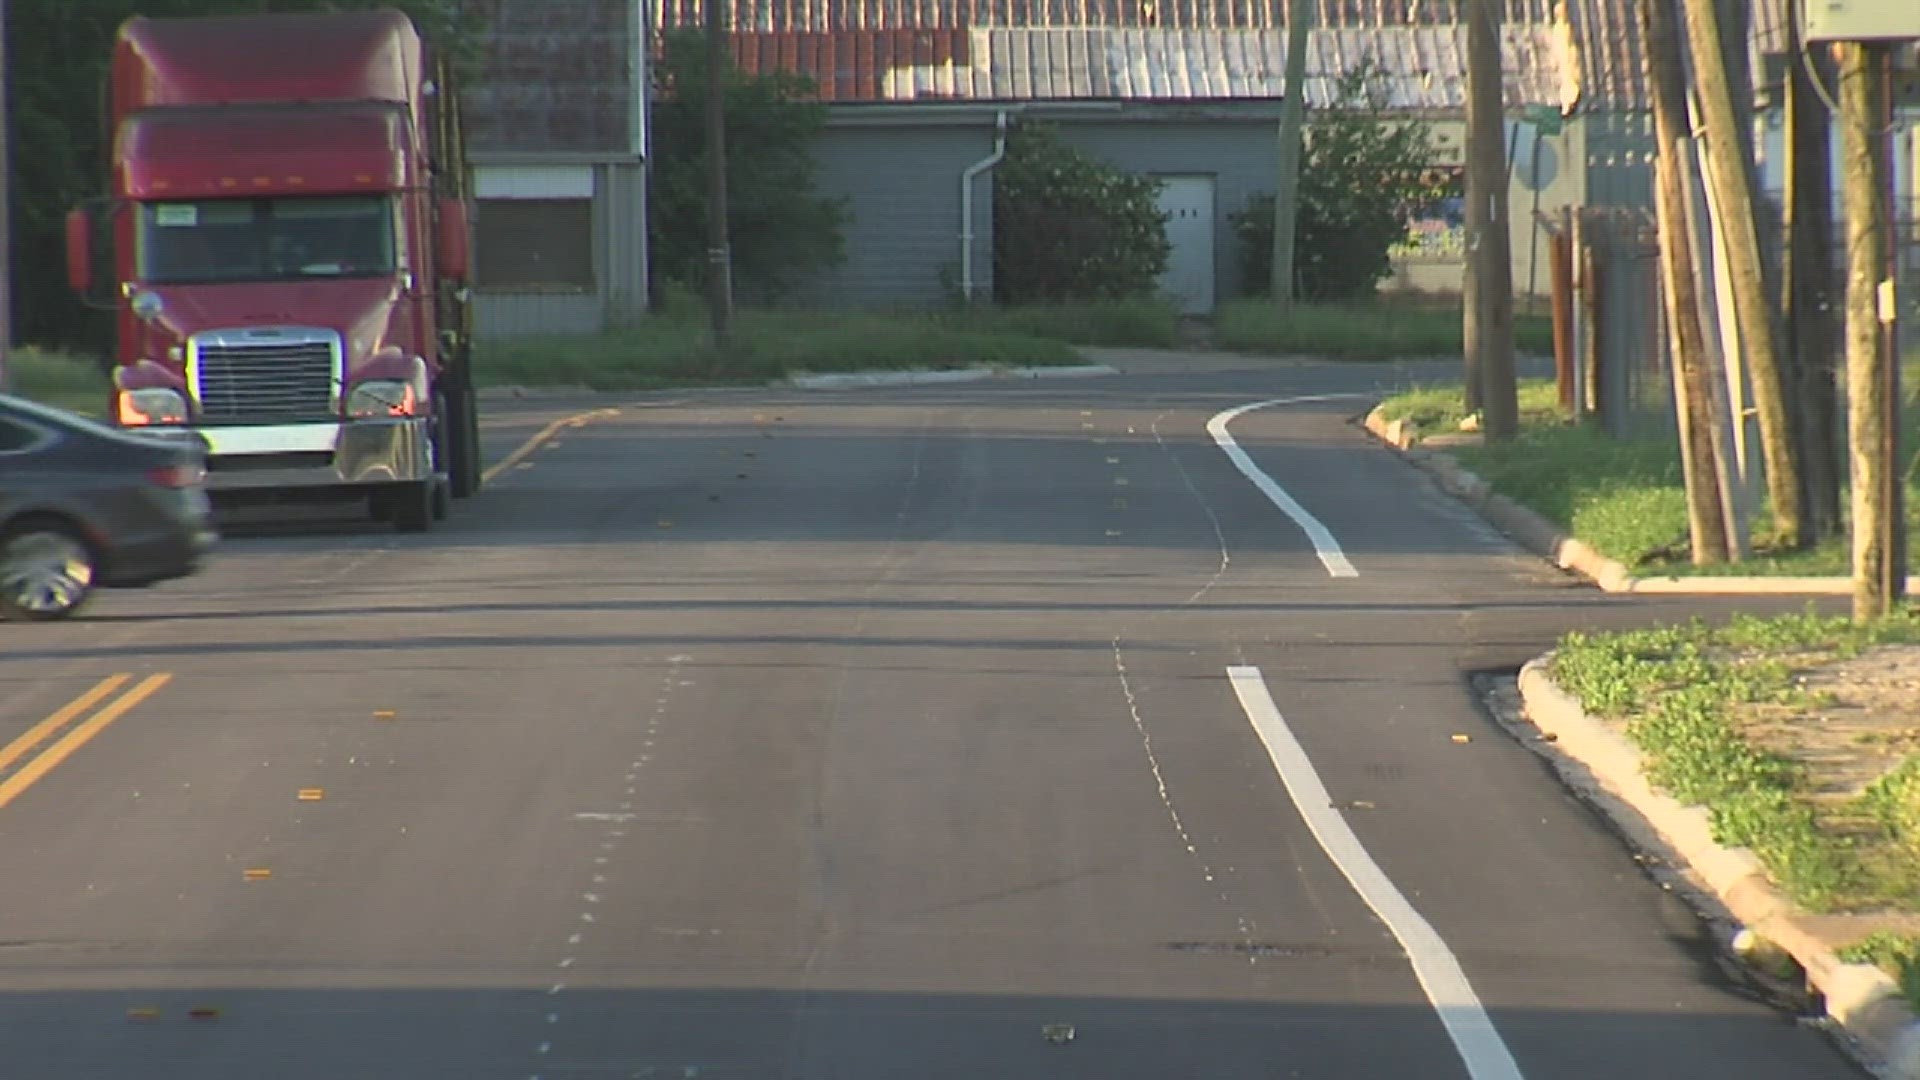 The city is working on adding bicycle lanes to 4th Street.